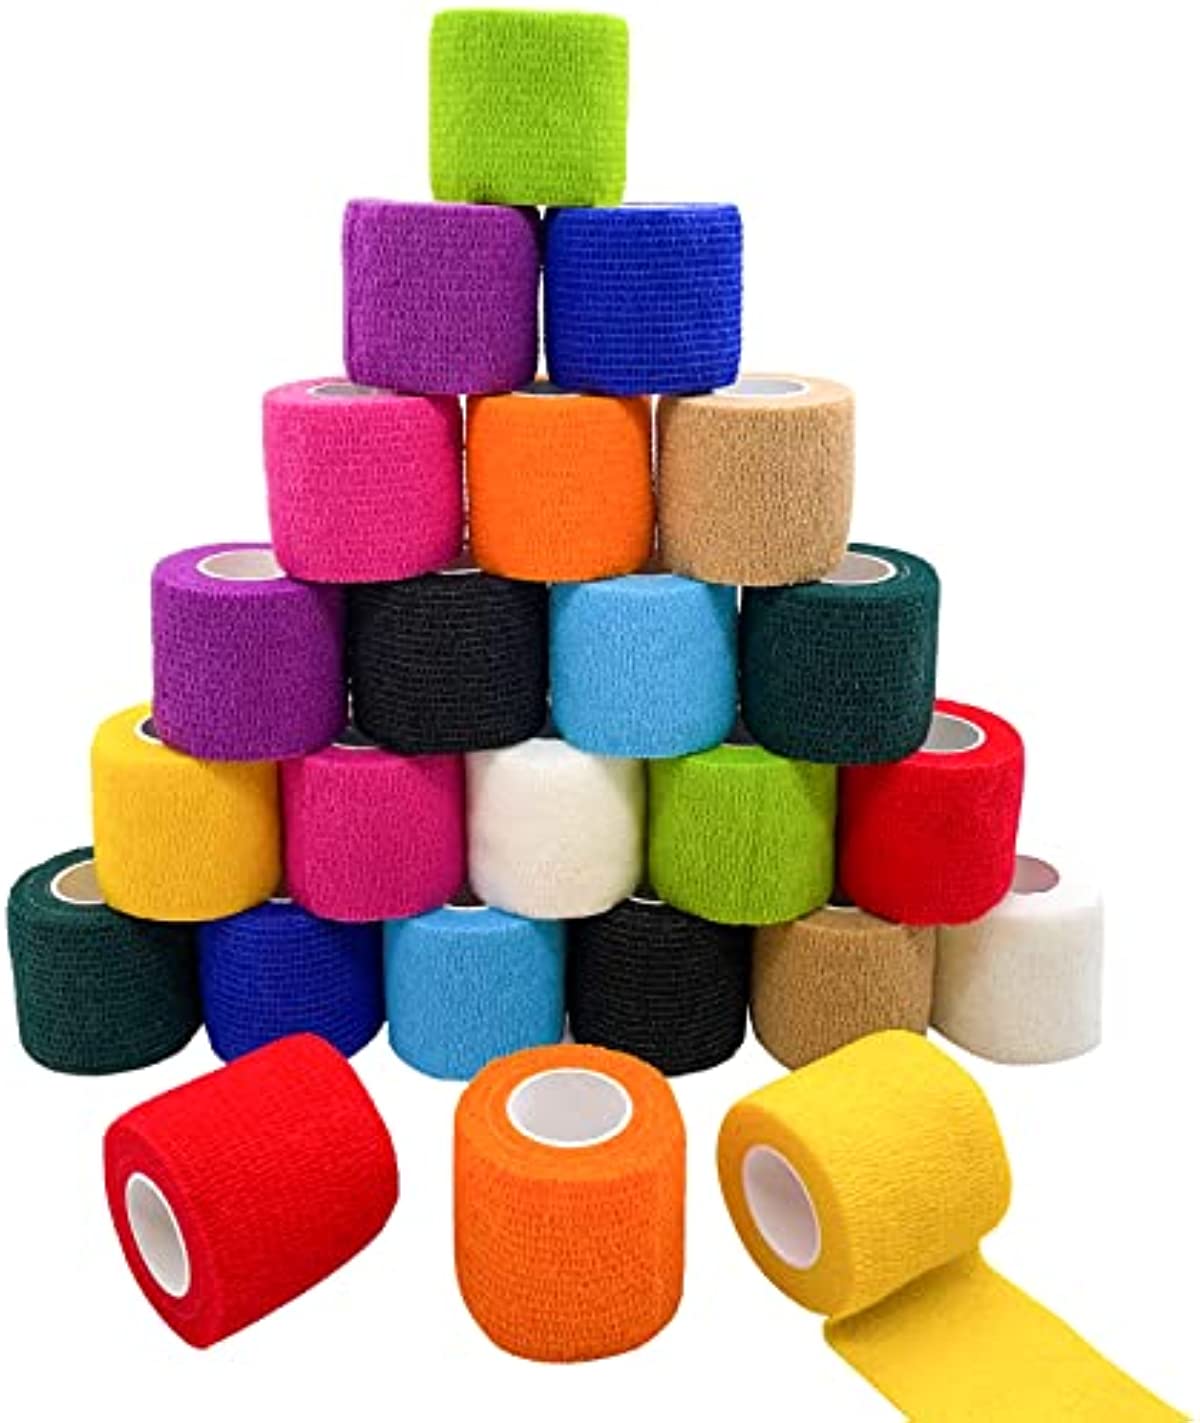 24 Pack 2” x 5 Yards Self Adhesive Bandage Wrap Athletic Elastic Breathable Cohesive Bandage Wrap Rolls for Stretch, Sports, First Aid, Wrist, Ankle Sprains, Swelling, and Vet Wrap(Rainbow)